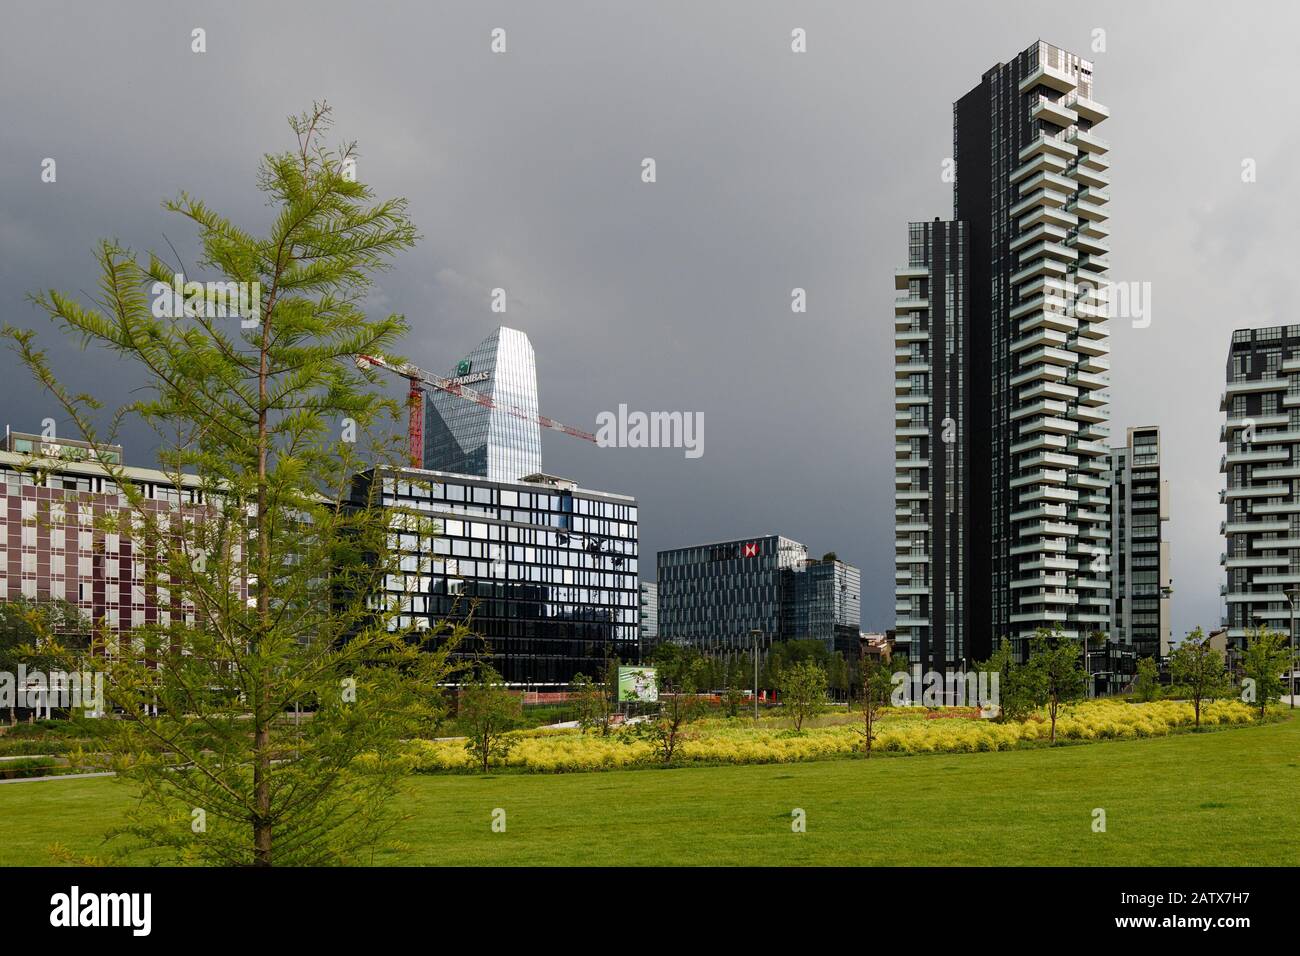 The Corner building, the Diamond tower and the Solaria tower group see from the city park Biblioteca degli Alberi before a thunderstorm, Milan, Italy Stock Photo